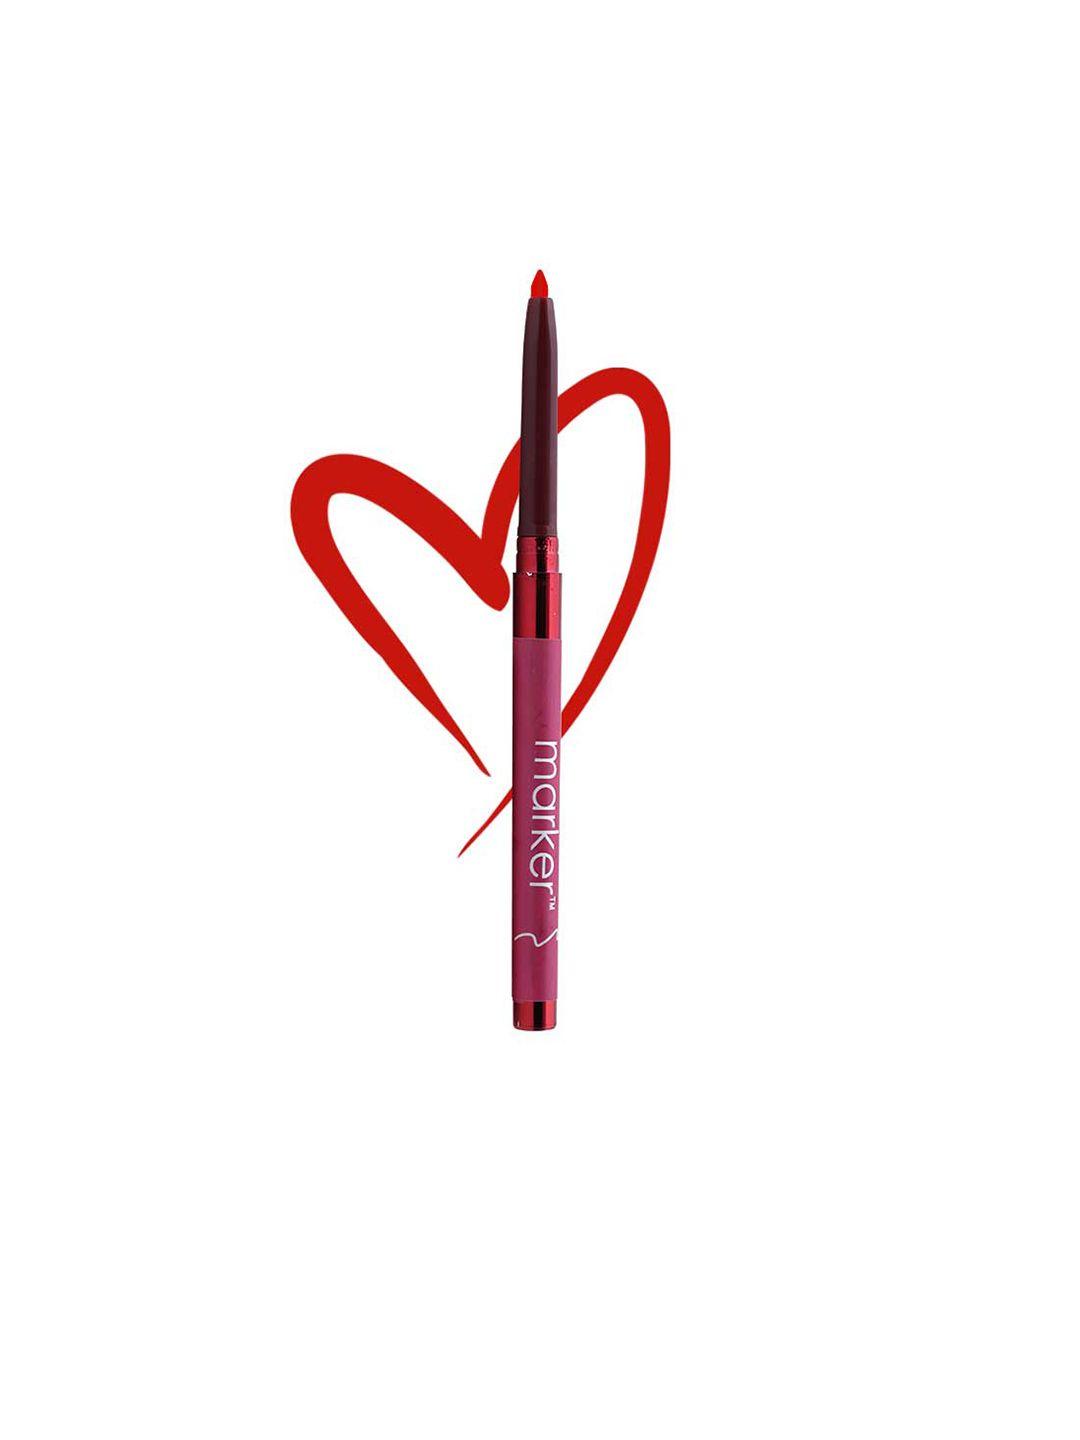 beautyrelay london outline the lips long-lasting lip liner with vitamin e 0.27g - coral dilemma